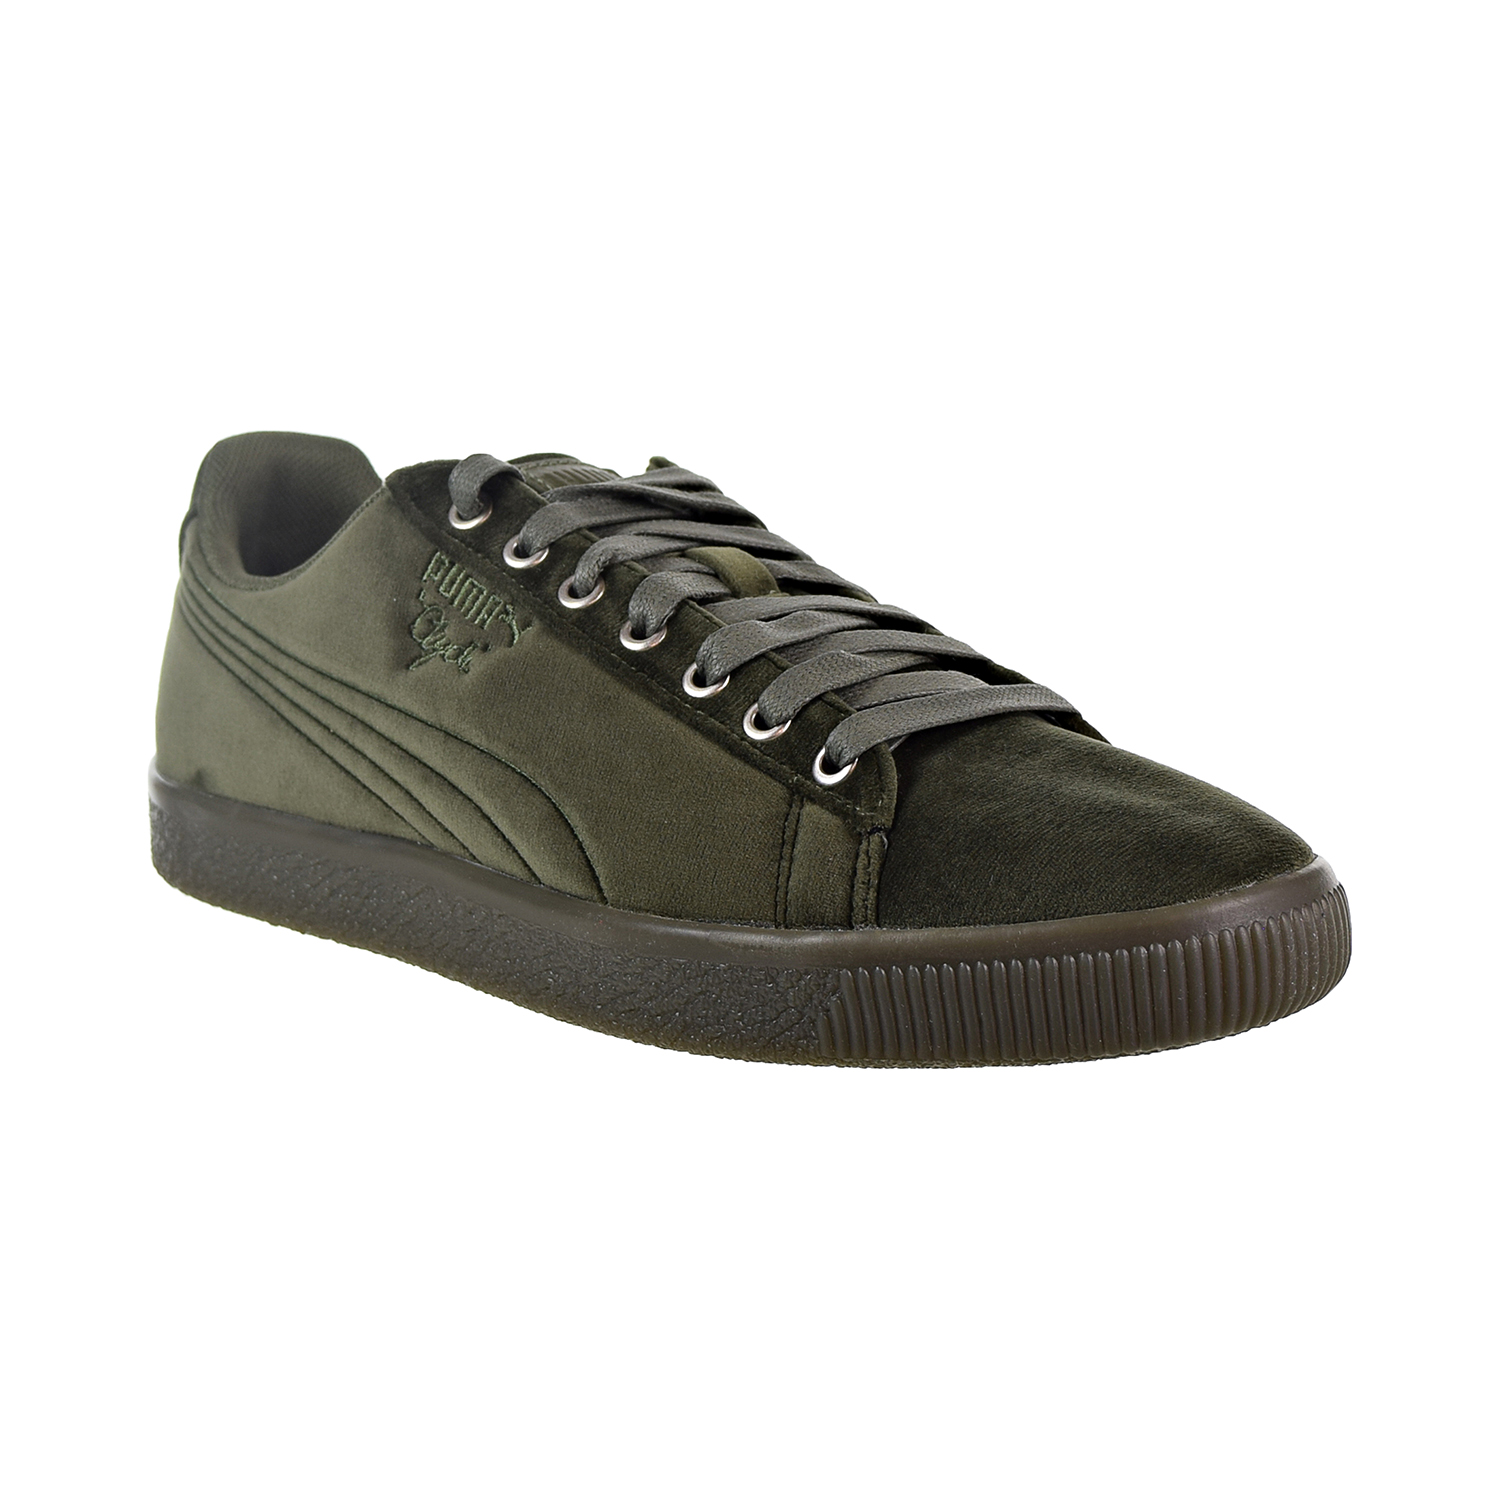 Puma clyde Velour Ice Men's Shoes Olive Green 366549-03 - image 2 of 6